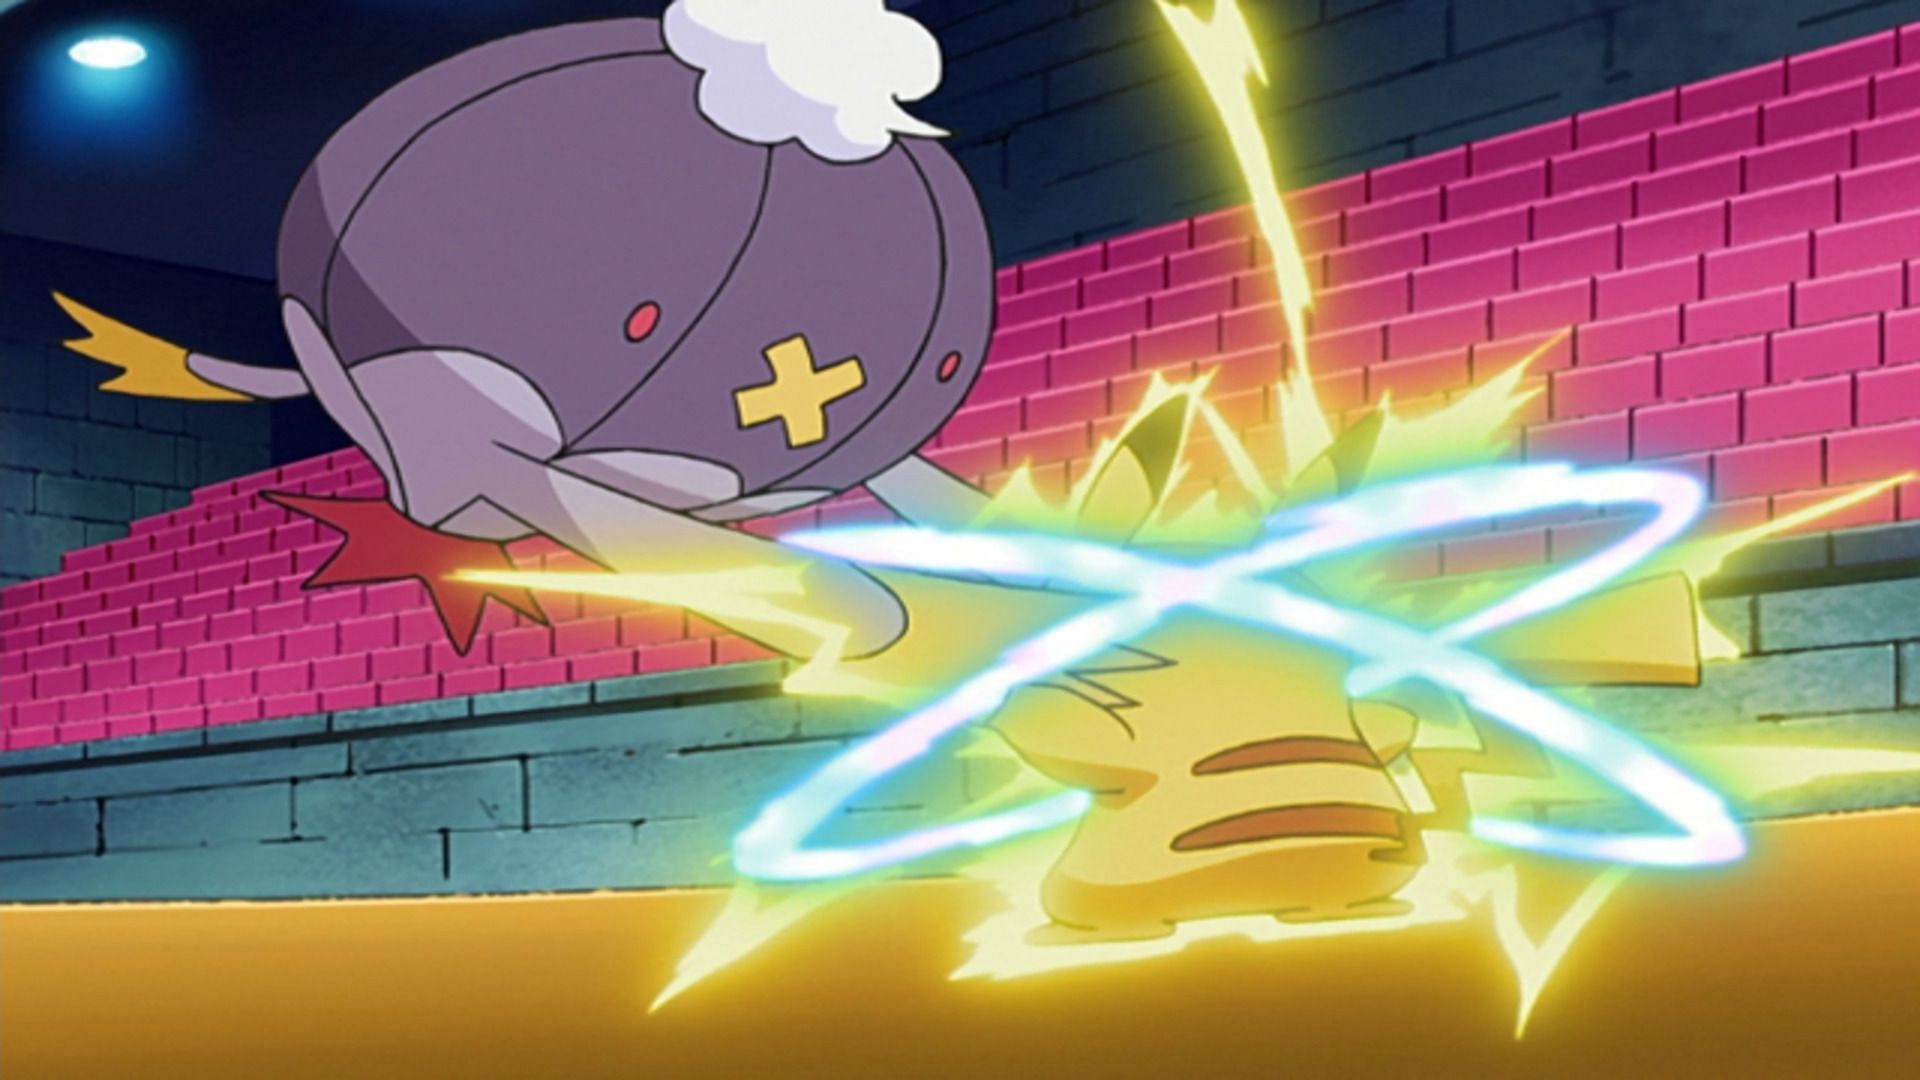 This episode debuted the Counter Shield technique, which would make a return in the Alola season of the anime (Image via The Pokemon Company)